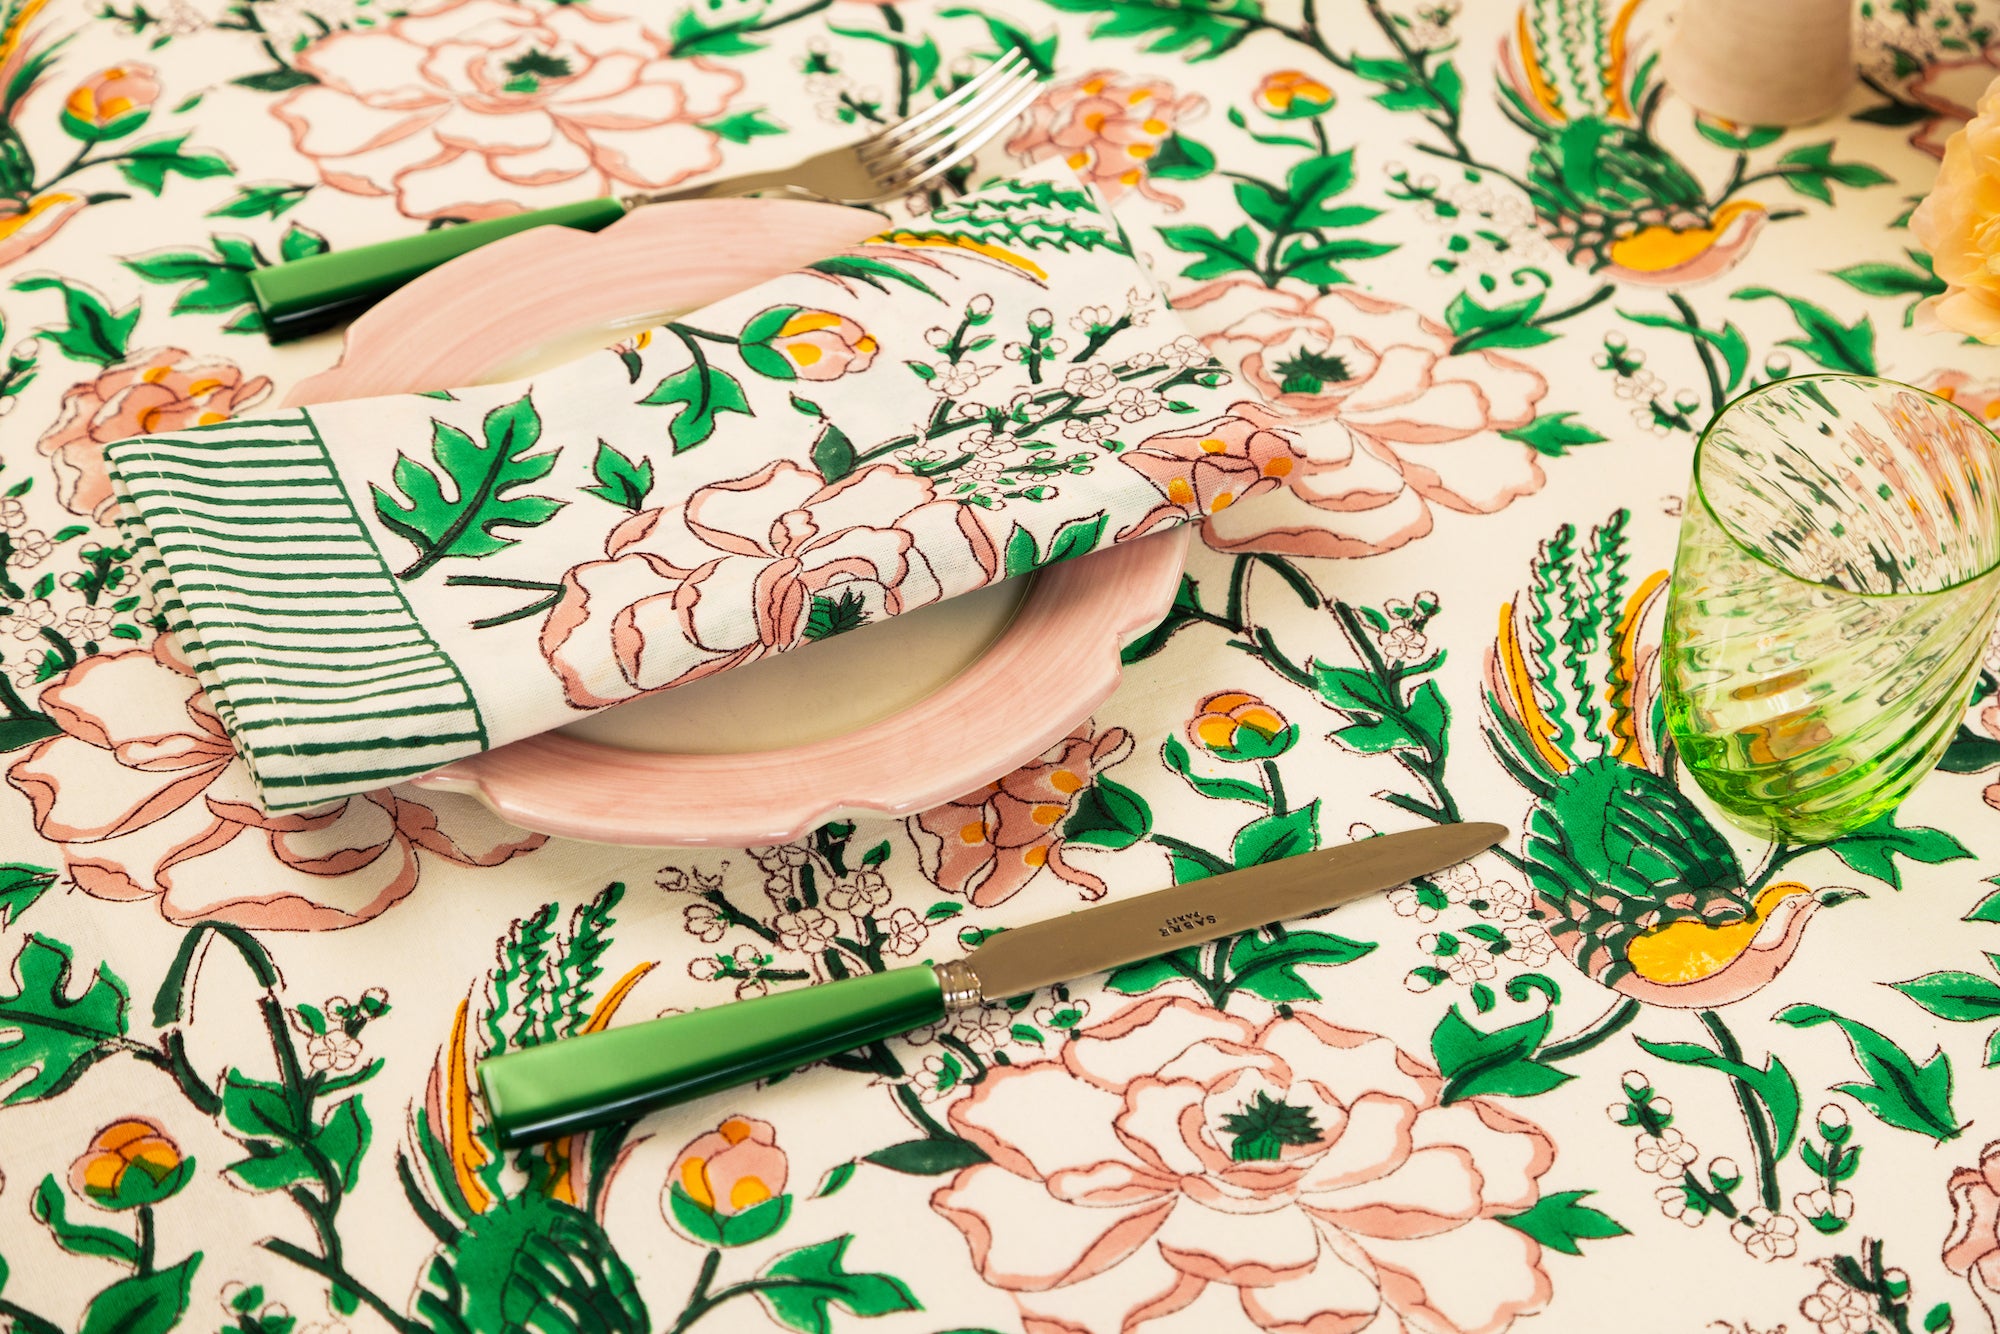 Pink & green tropical print napkin and table cloth